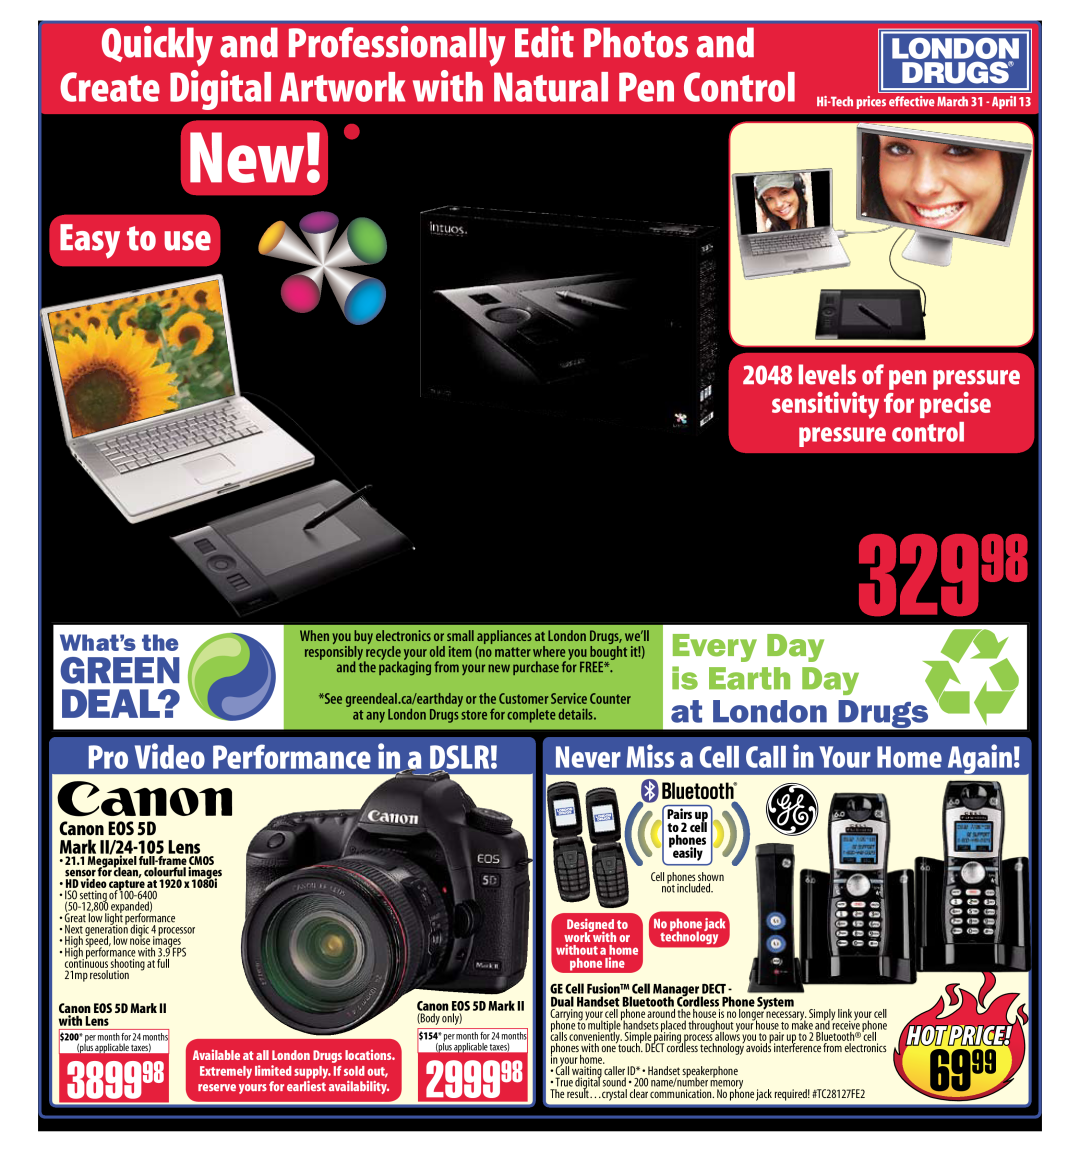 Cannon EOS5D manual 299998, Never Miss a Cell Call in Your Home Again, Wacom Intuos4 Small PenTablet, Deal?, Easy to use 